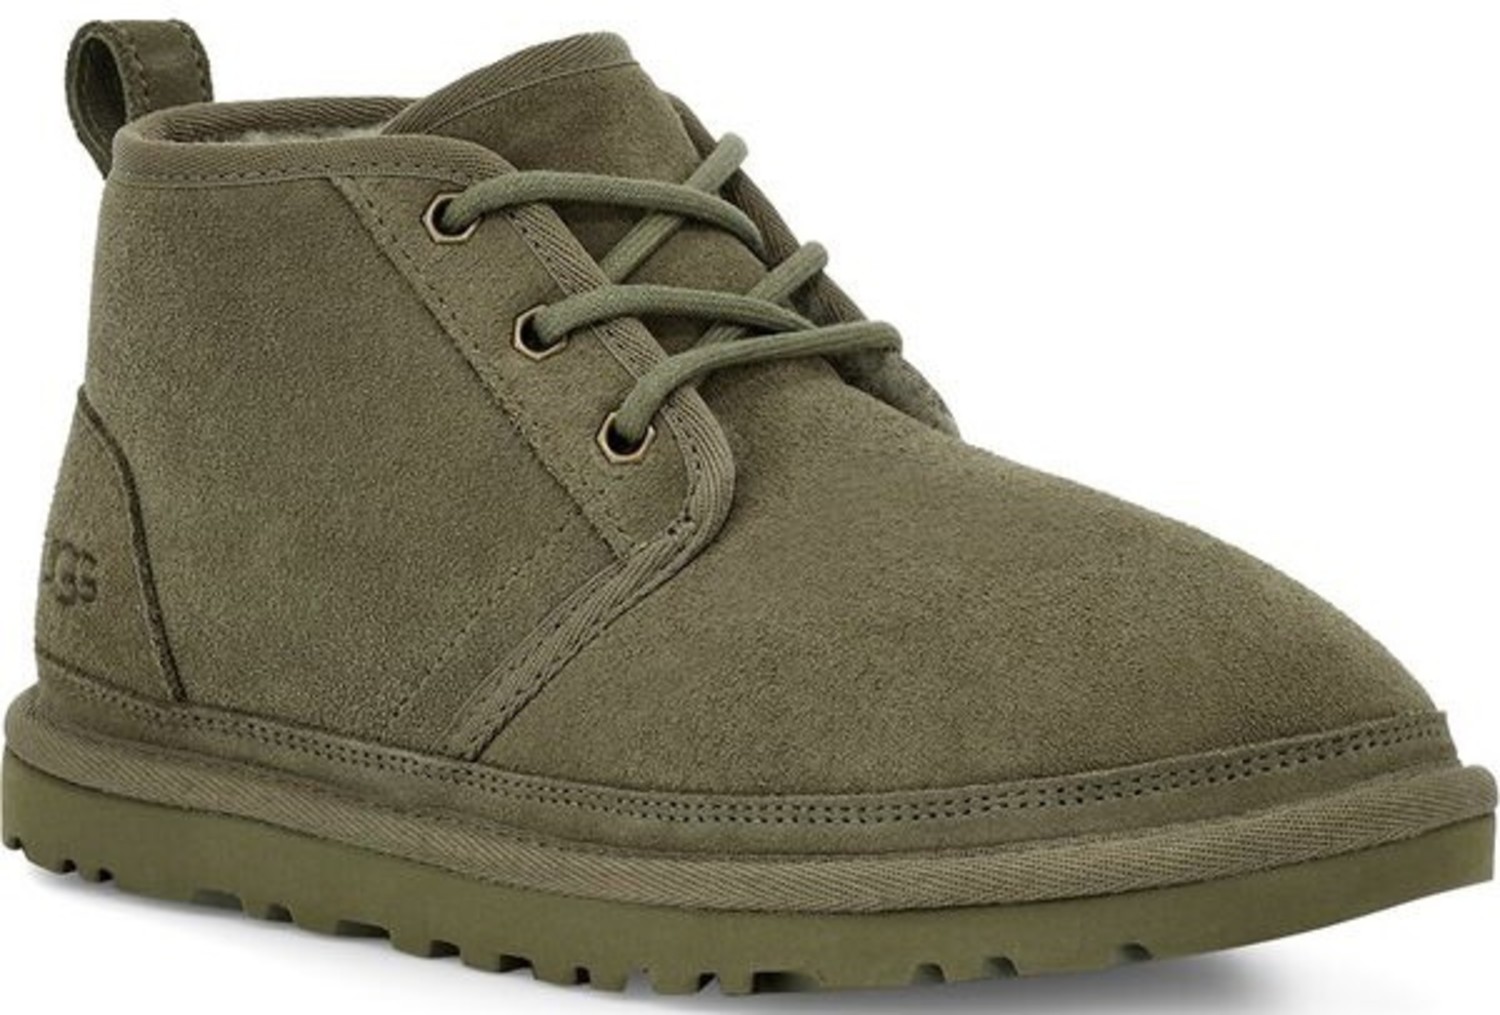 UGG Women's Neumel Burnt Olive Suede Boot - Continental Shoes